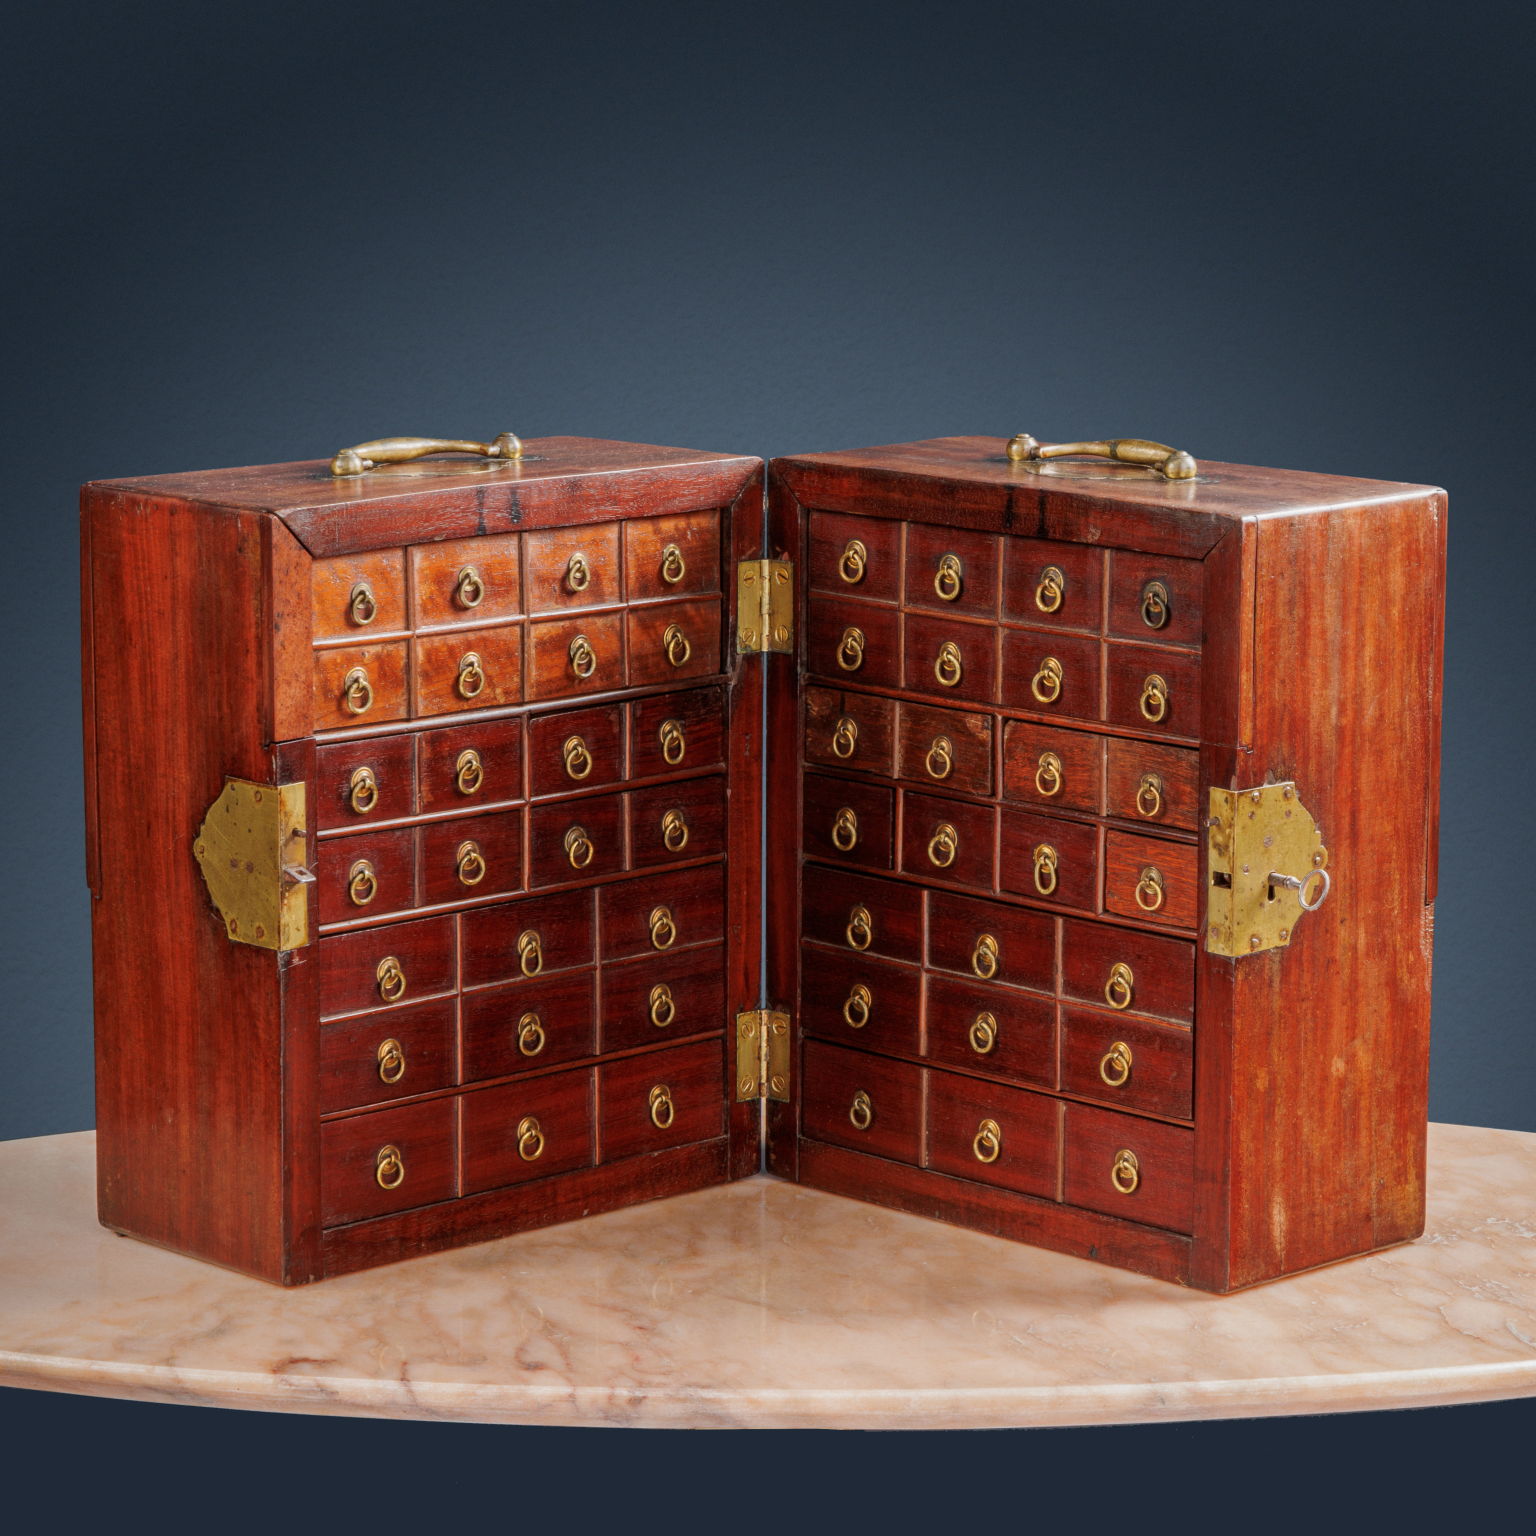 Travel pharmacy for apothecary, Tuscany, first quarter of the 19th century.